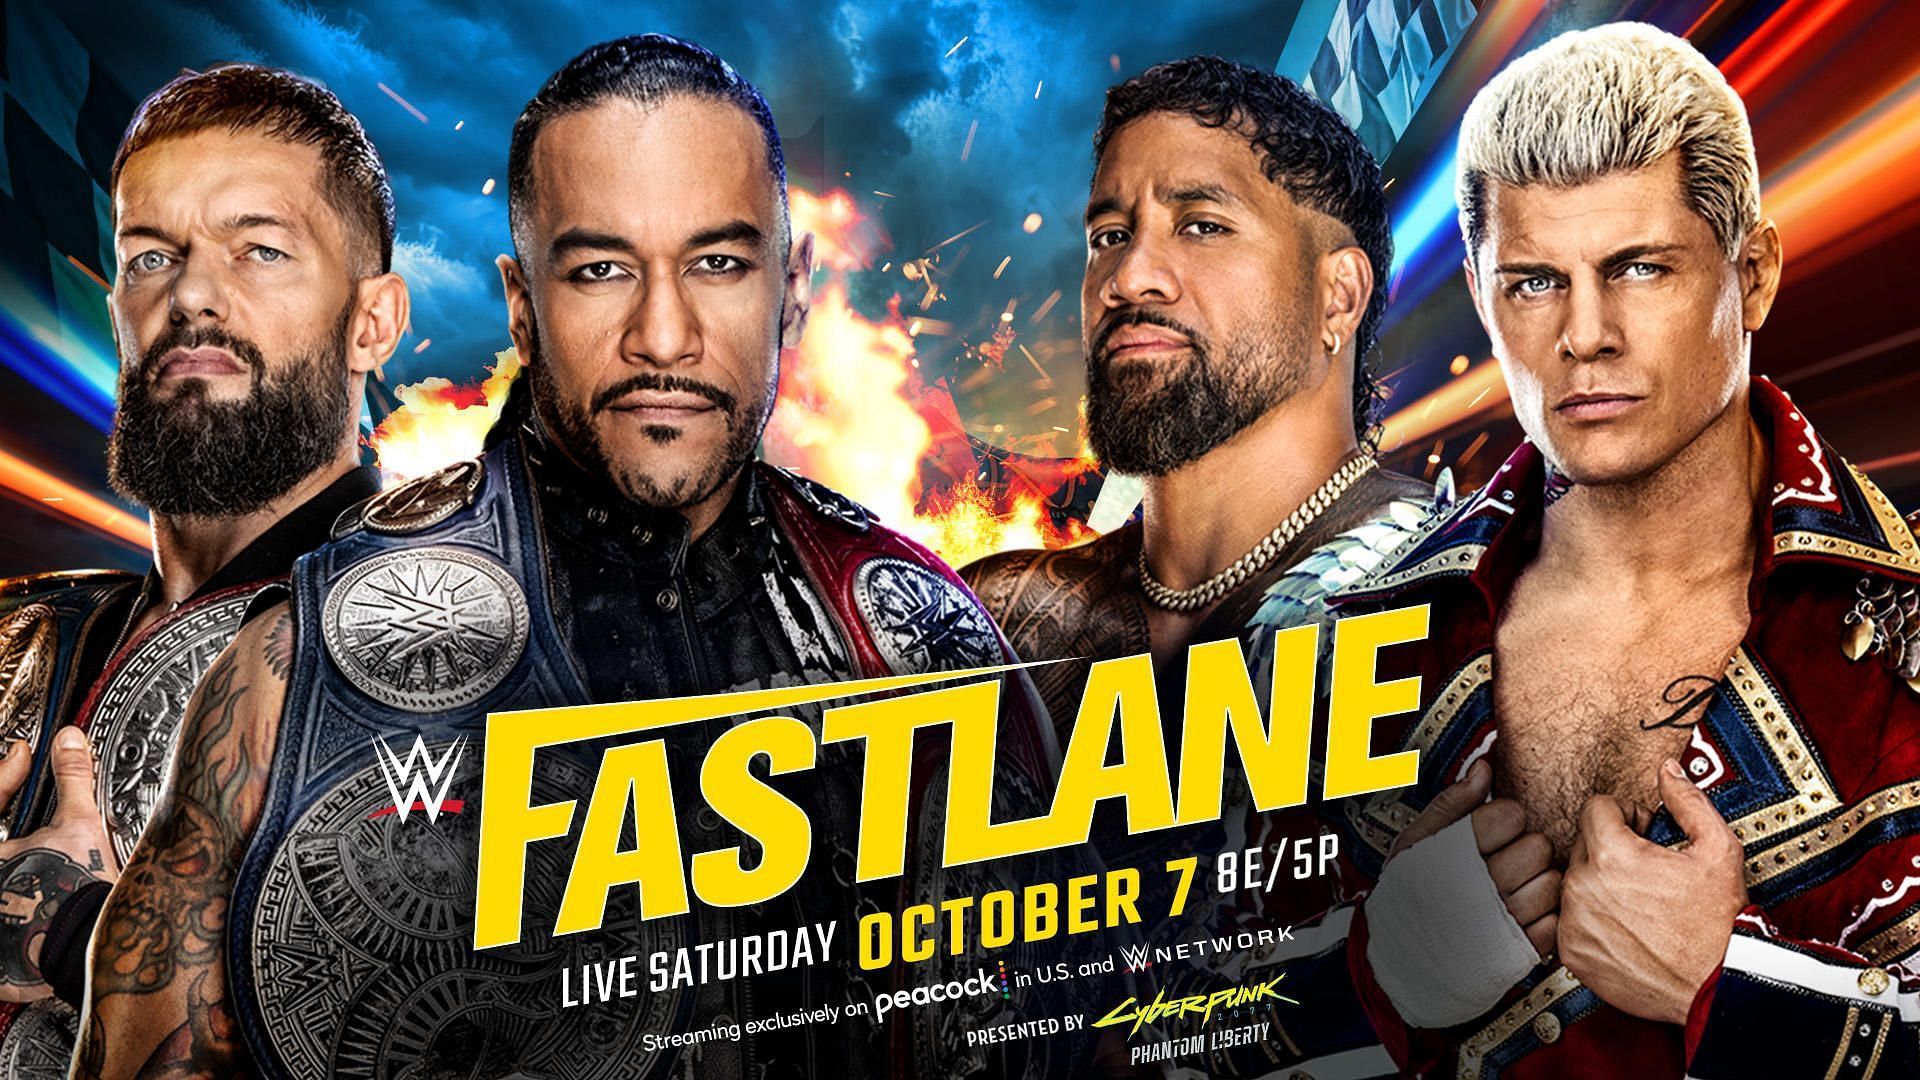 What surprises are in store for us at WWE Fastlane?